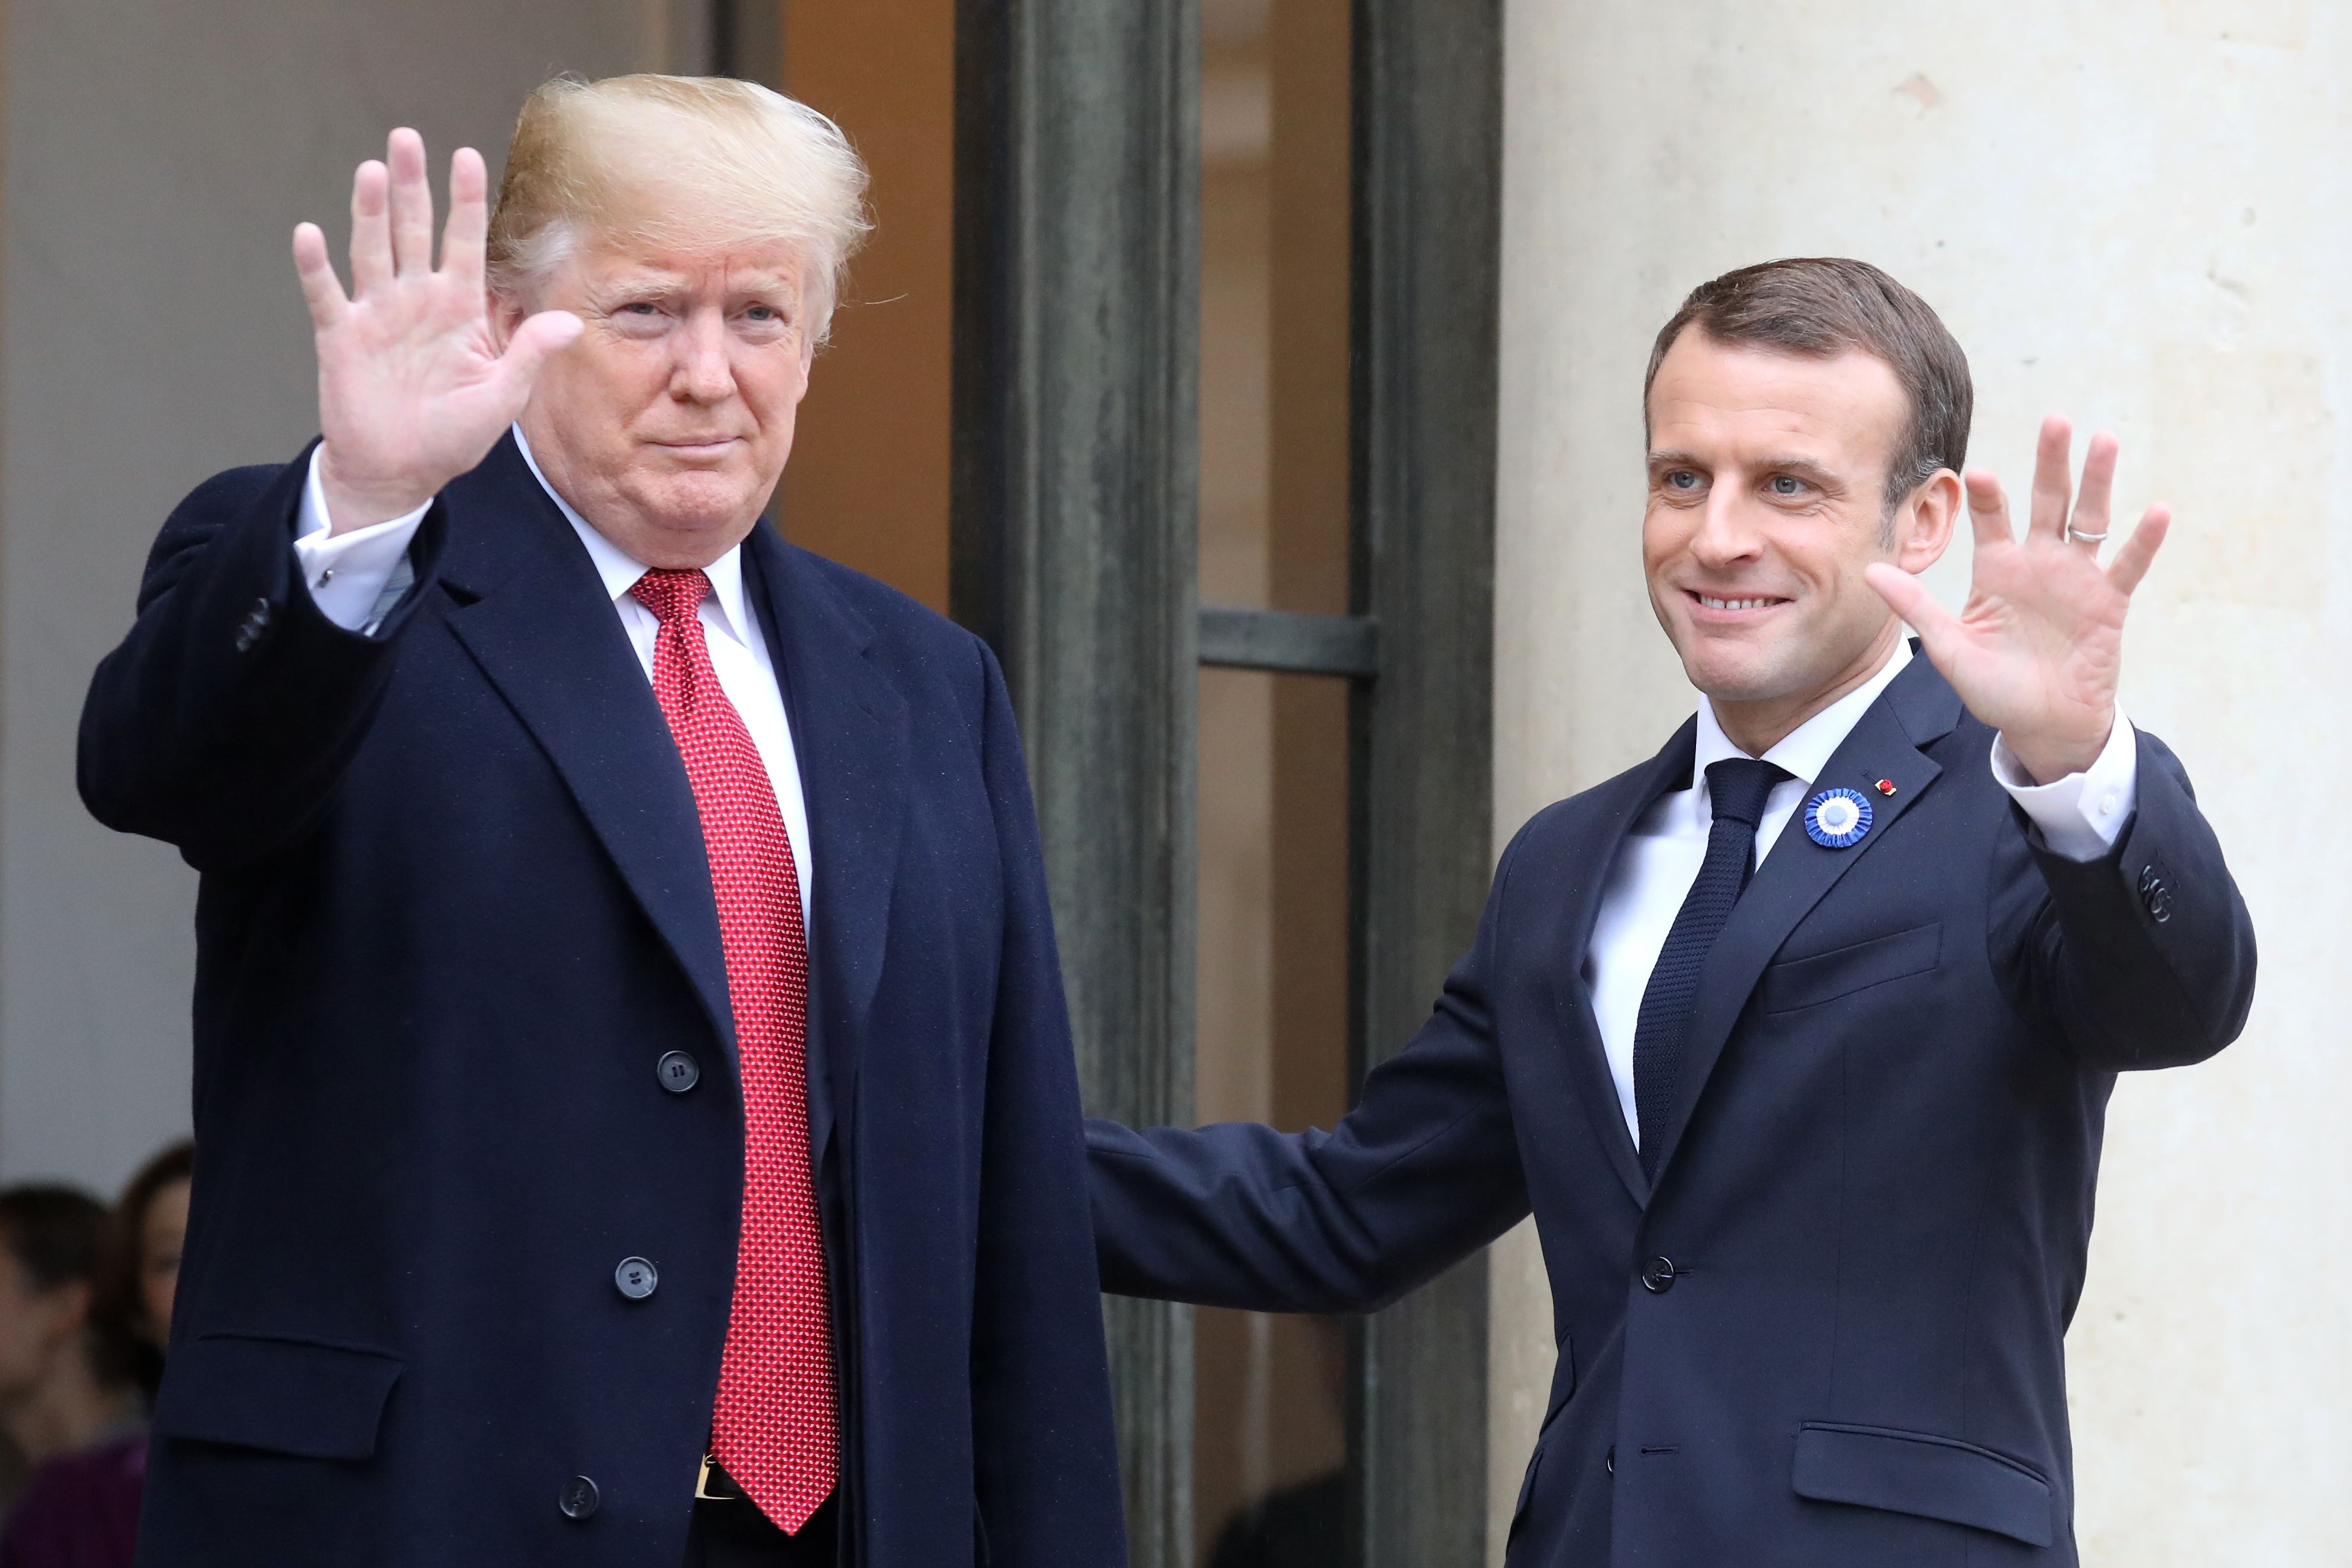 US President Donald Trump is welcomed by French President Emmanuel Macron to the Elysee Palace in Paris.